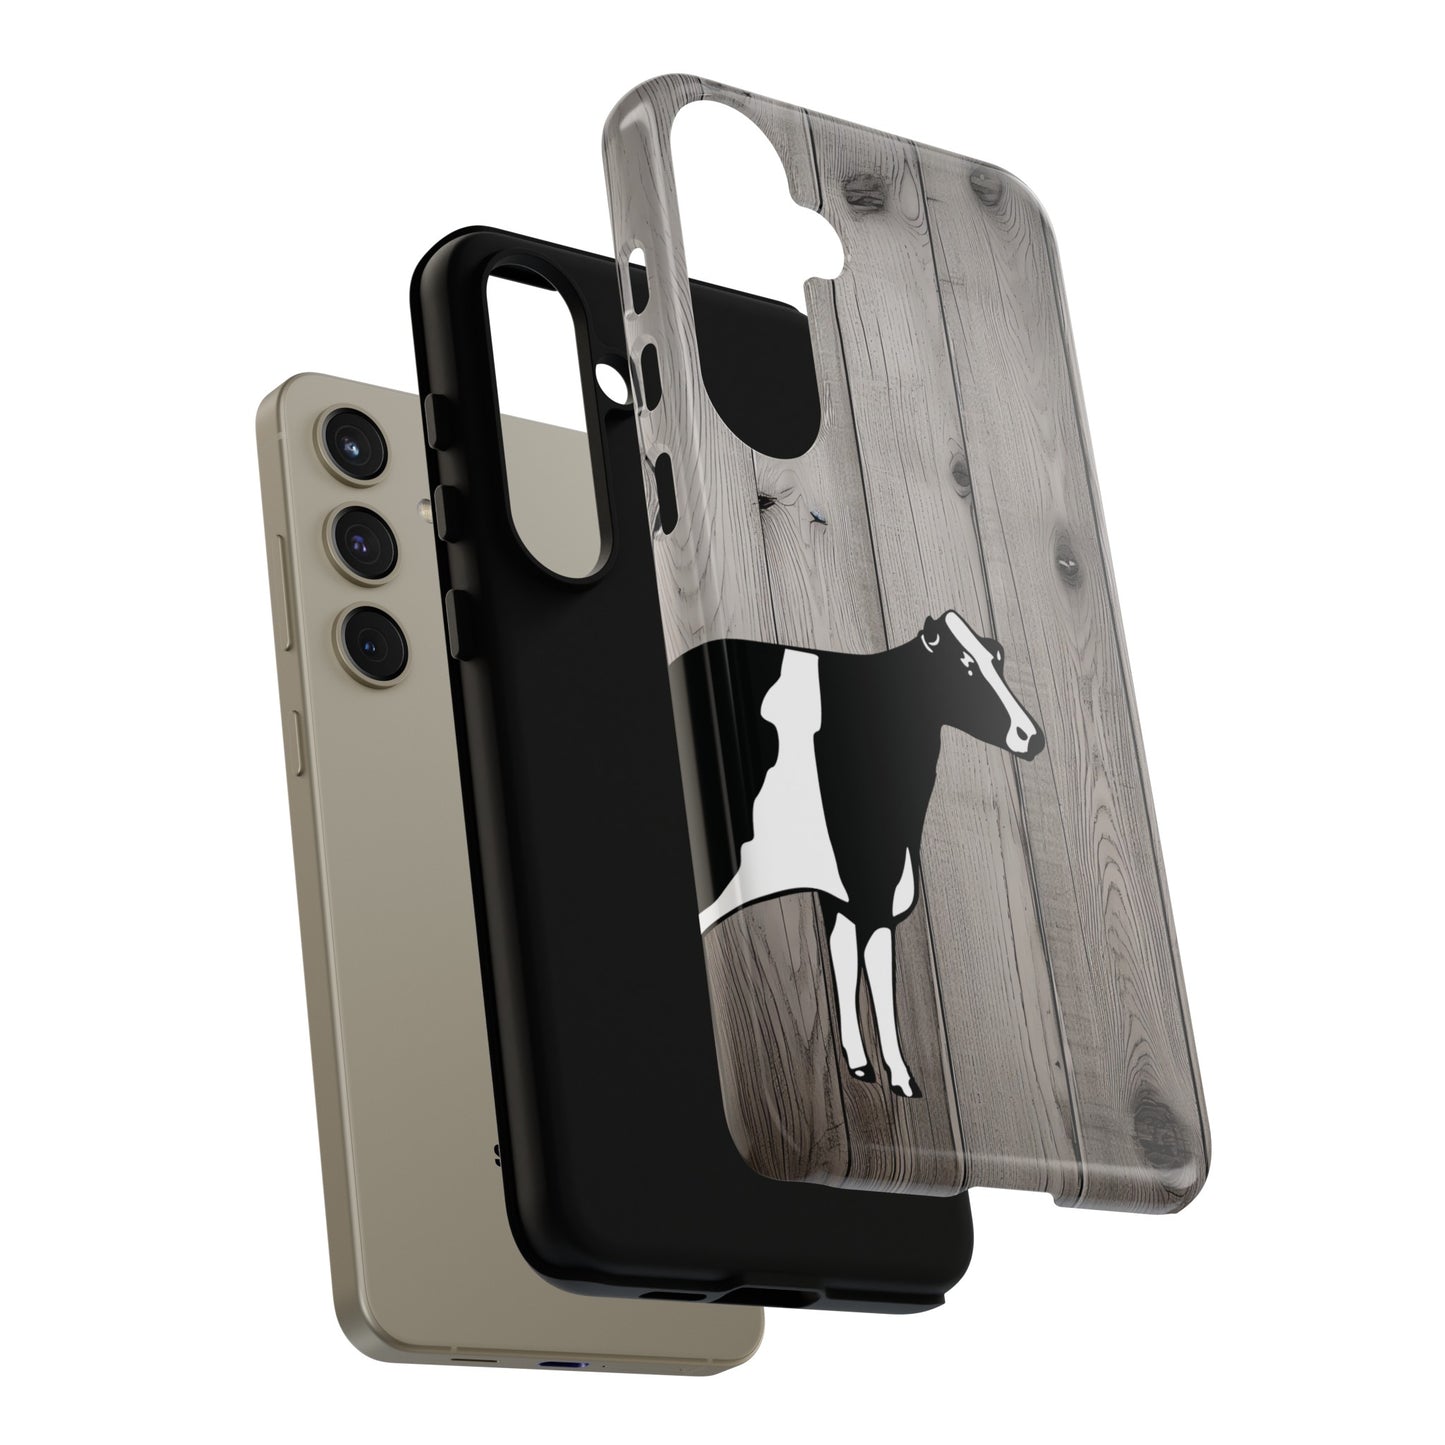 Livestock Show Cow Phone Cases - Livestock Show Dairy Cow - Android Cow Phone Cases-Wood Plank Background